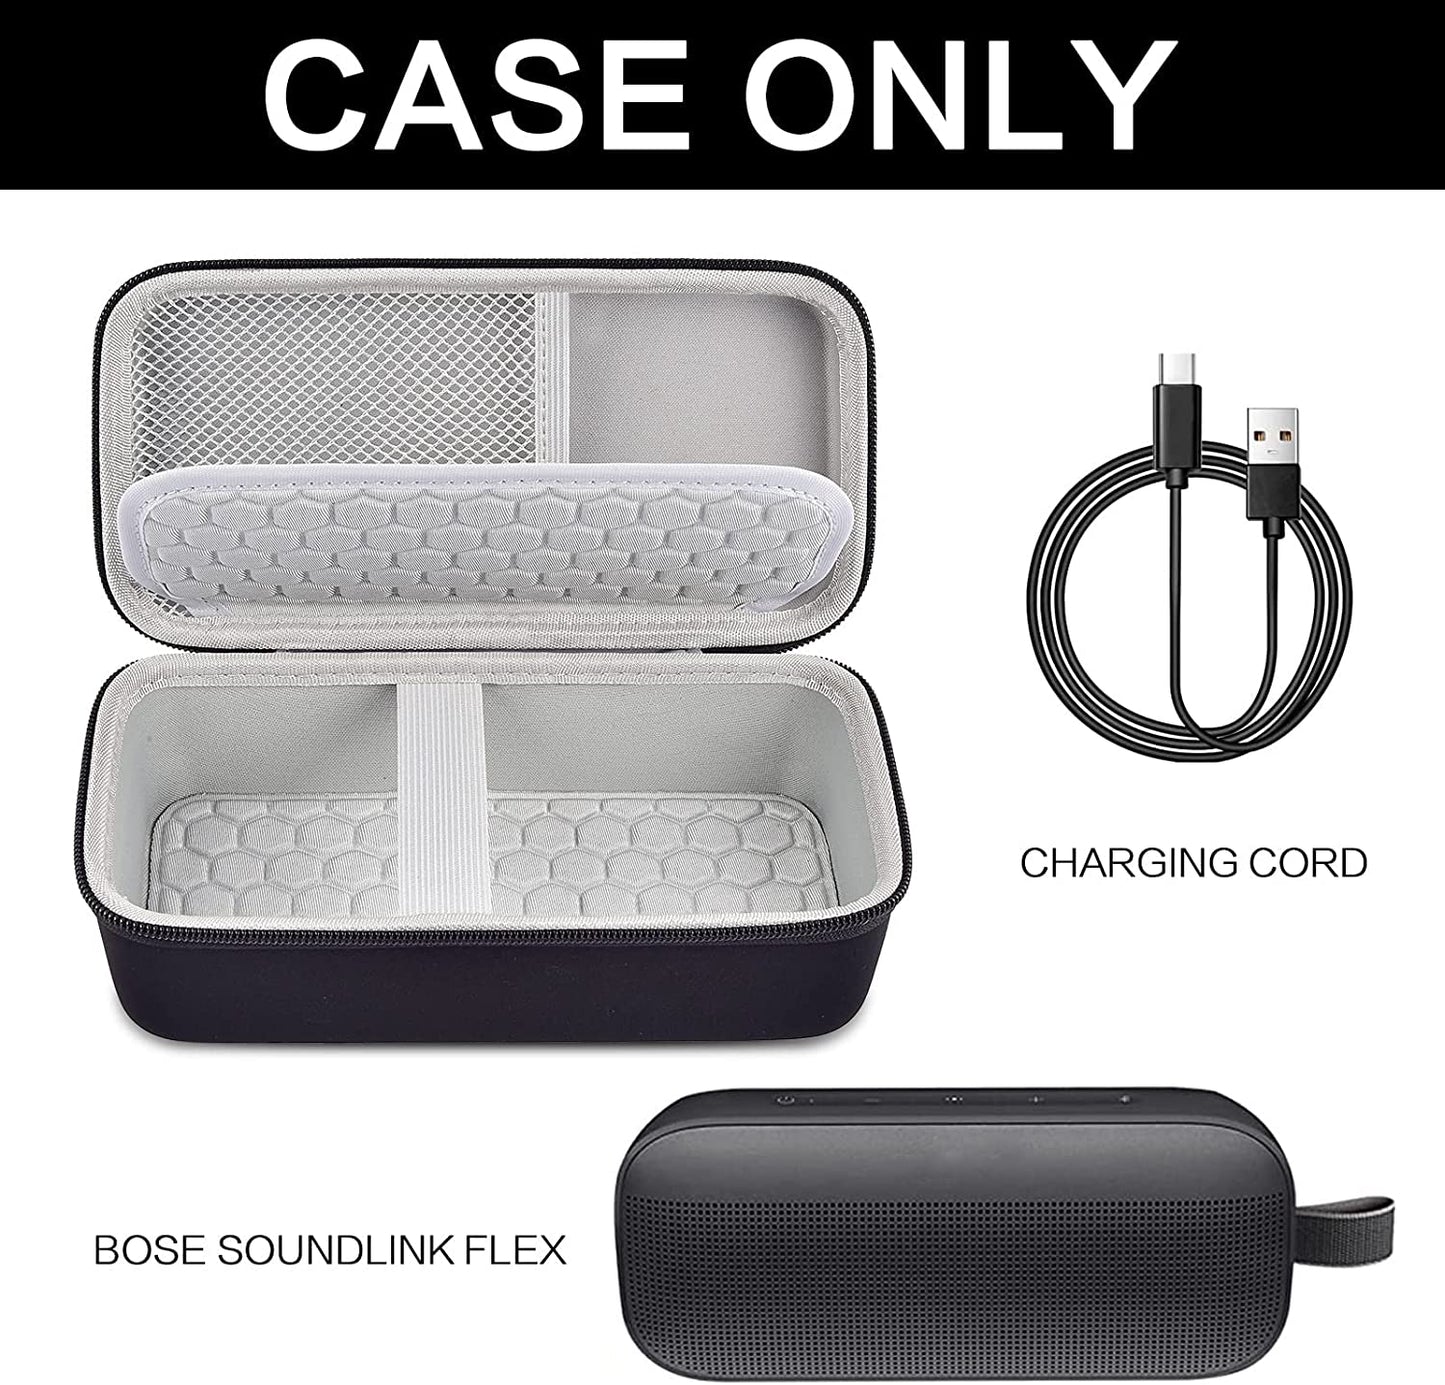 Case Compatible with Bose SoundLink Flex Bluetooth Portable Speaker, Travel Storage Organizer Carrying Holder Fits for USB Cable and Charger,Grey-Box Only